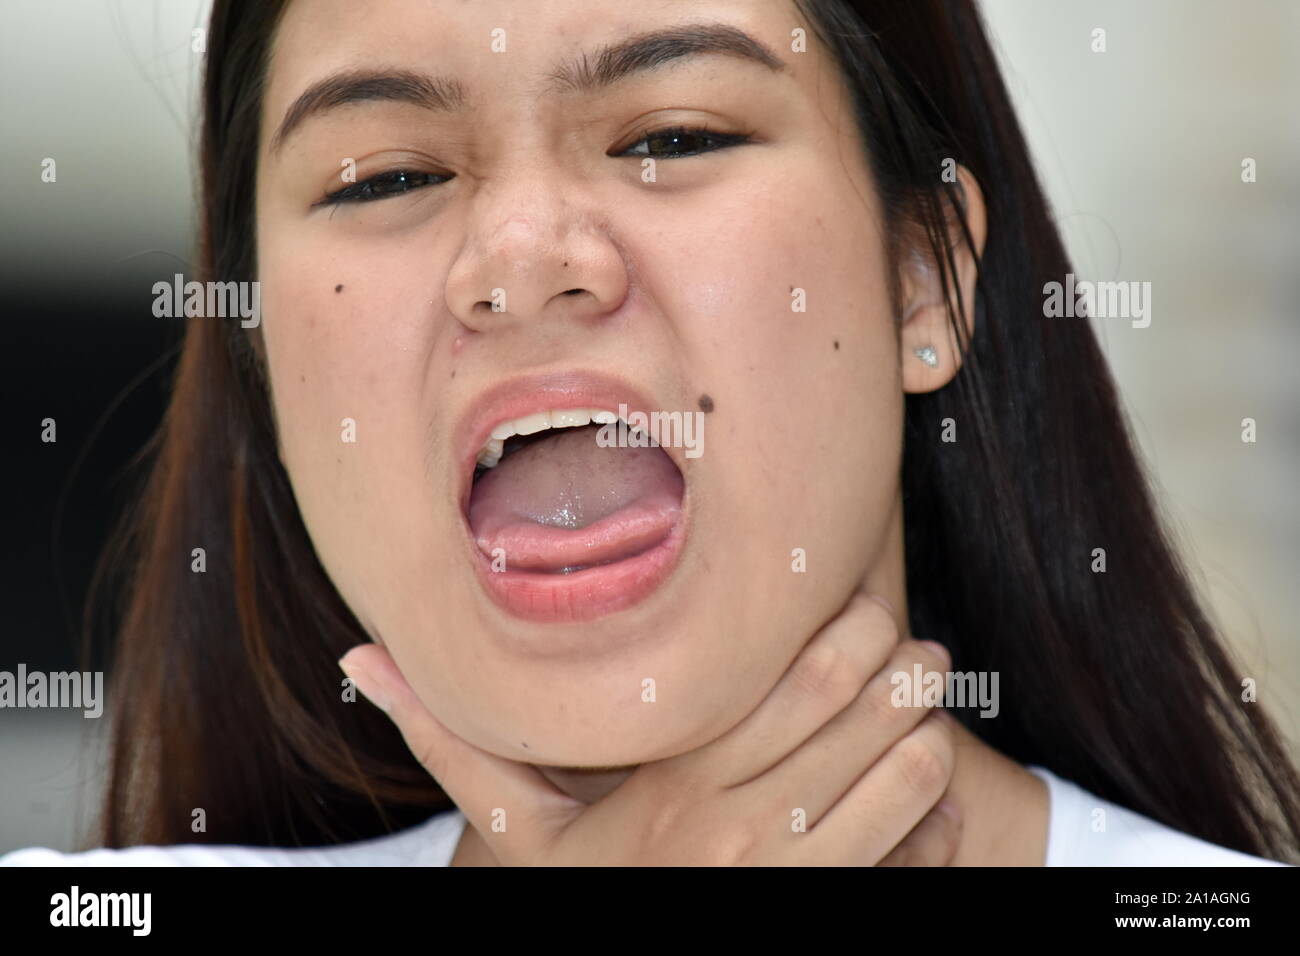 A Young Female Choking Stock Photo